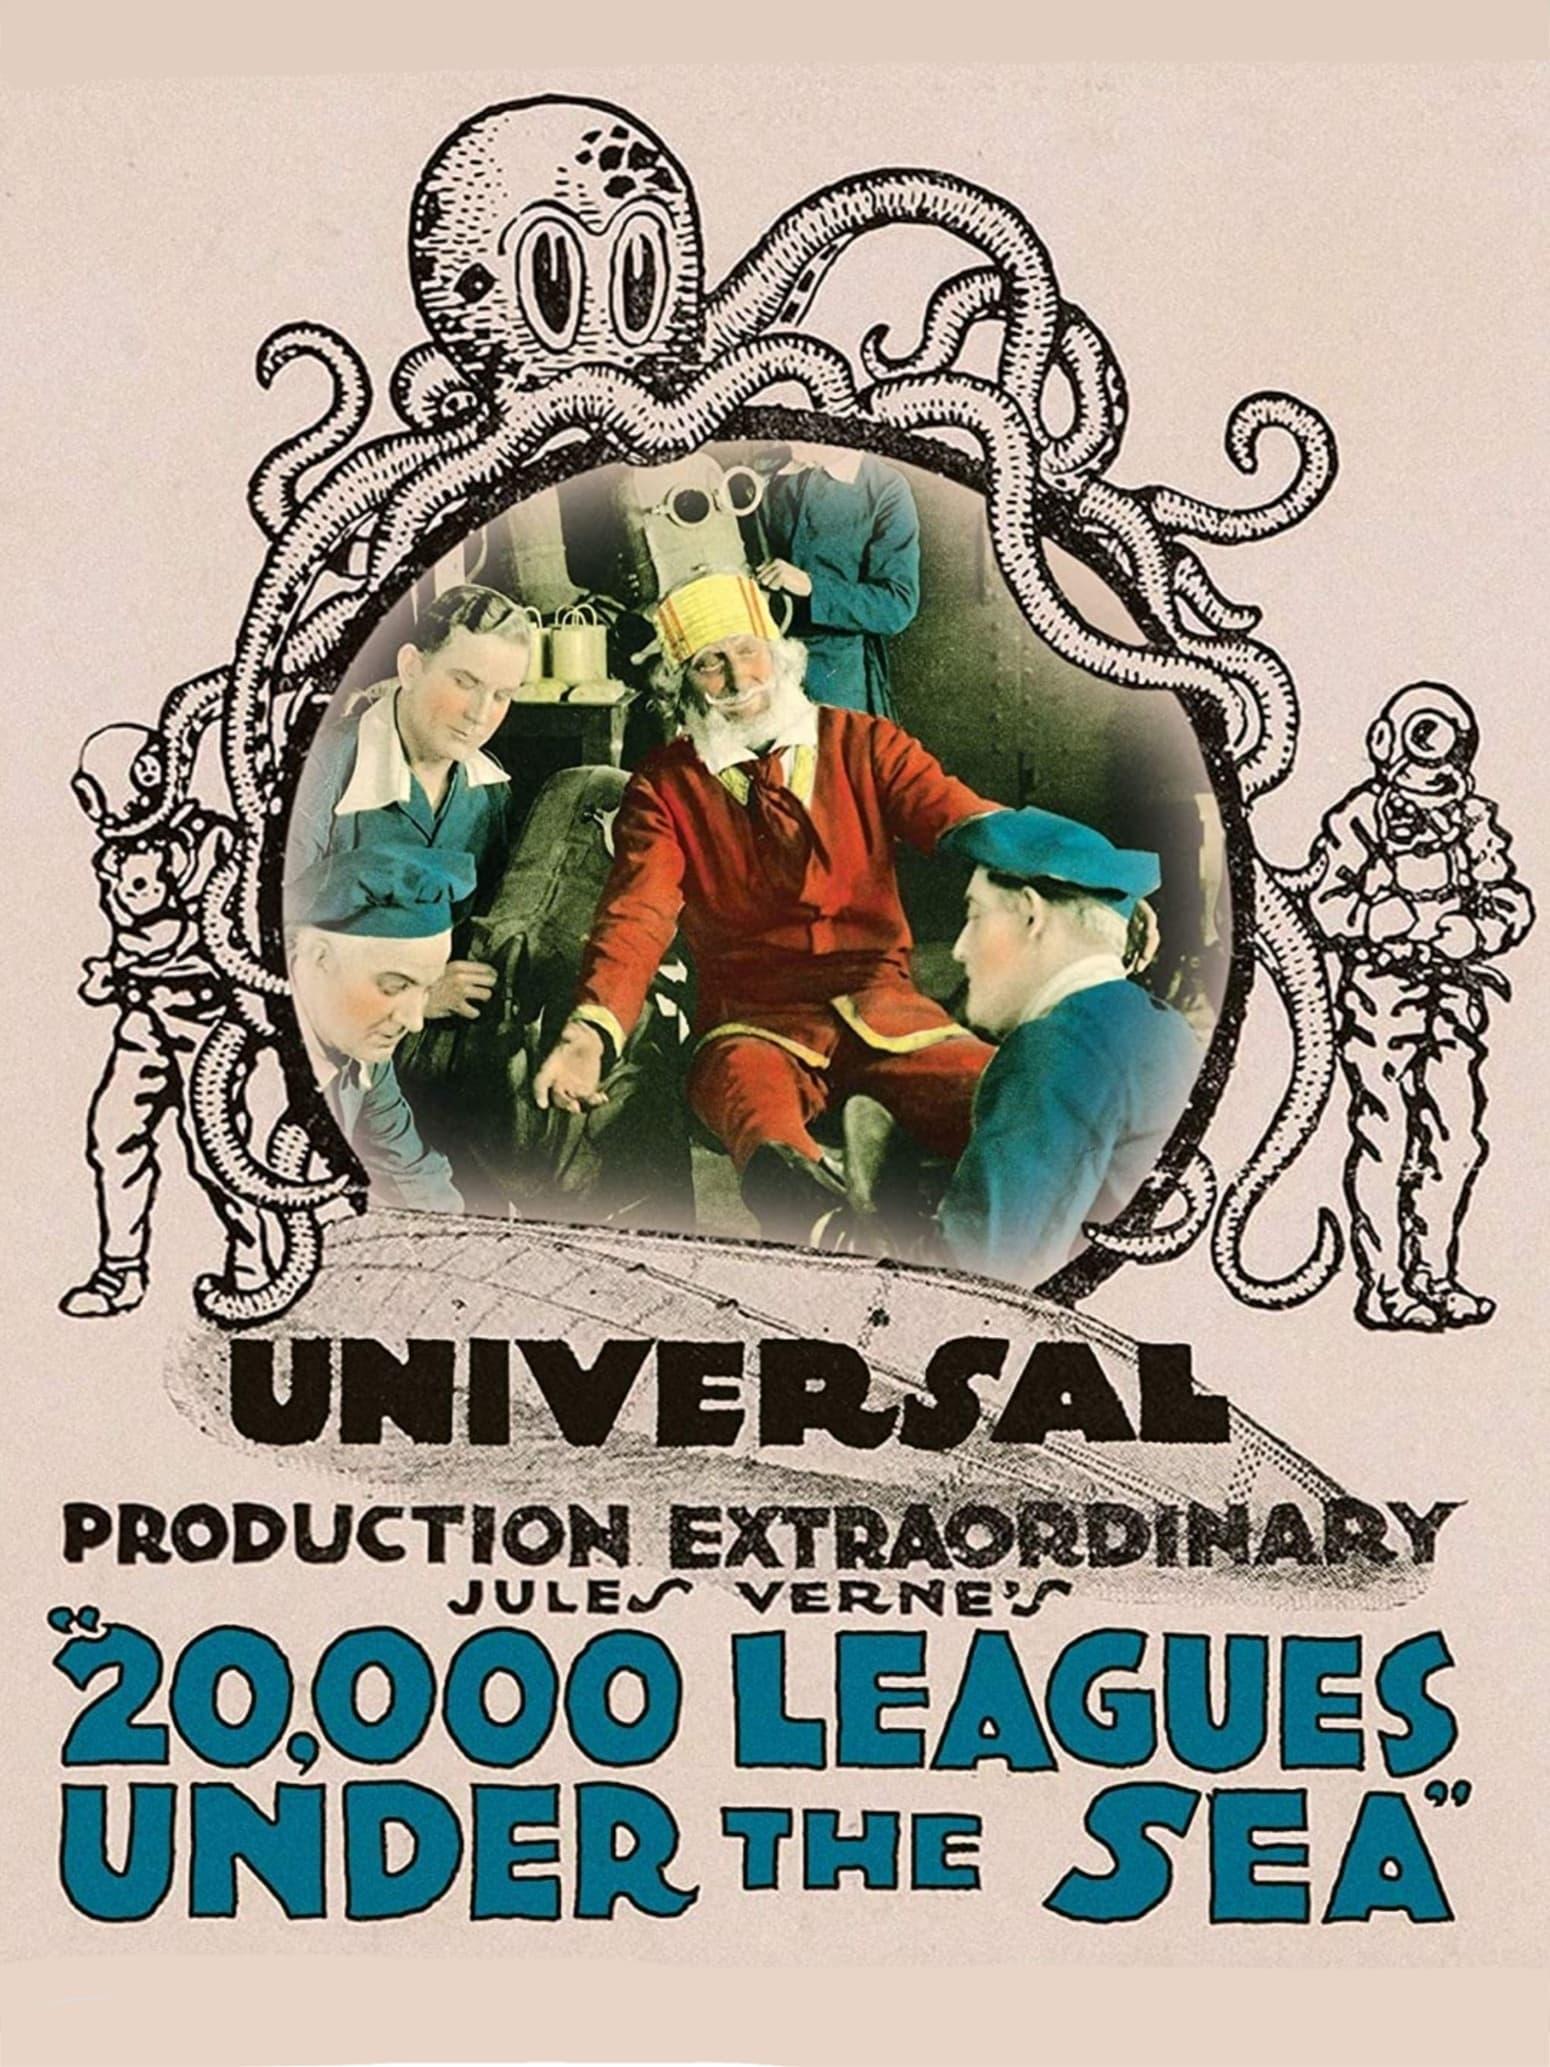 20,000 Leagues Under the Sea poster